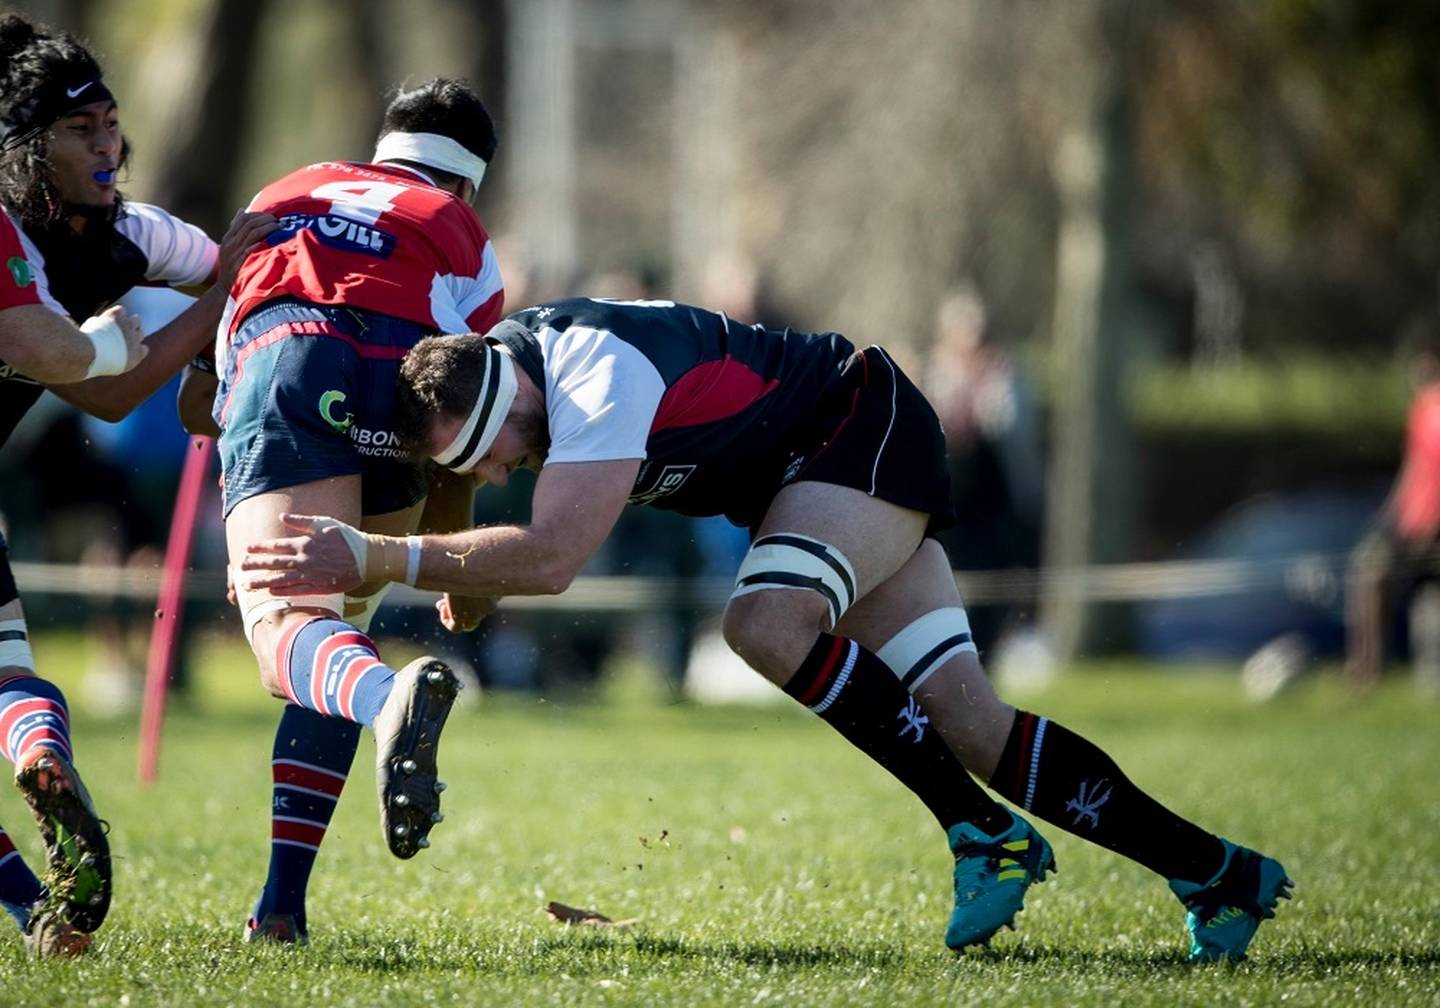 Kieran Read puts in a tackle while playing for the Counties Manukau Selection. Photo: NZ Herald 